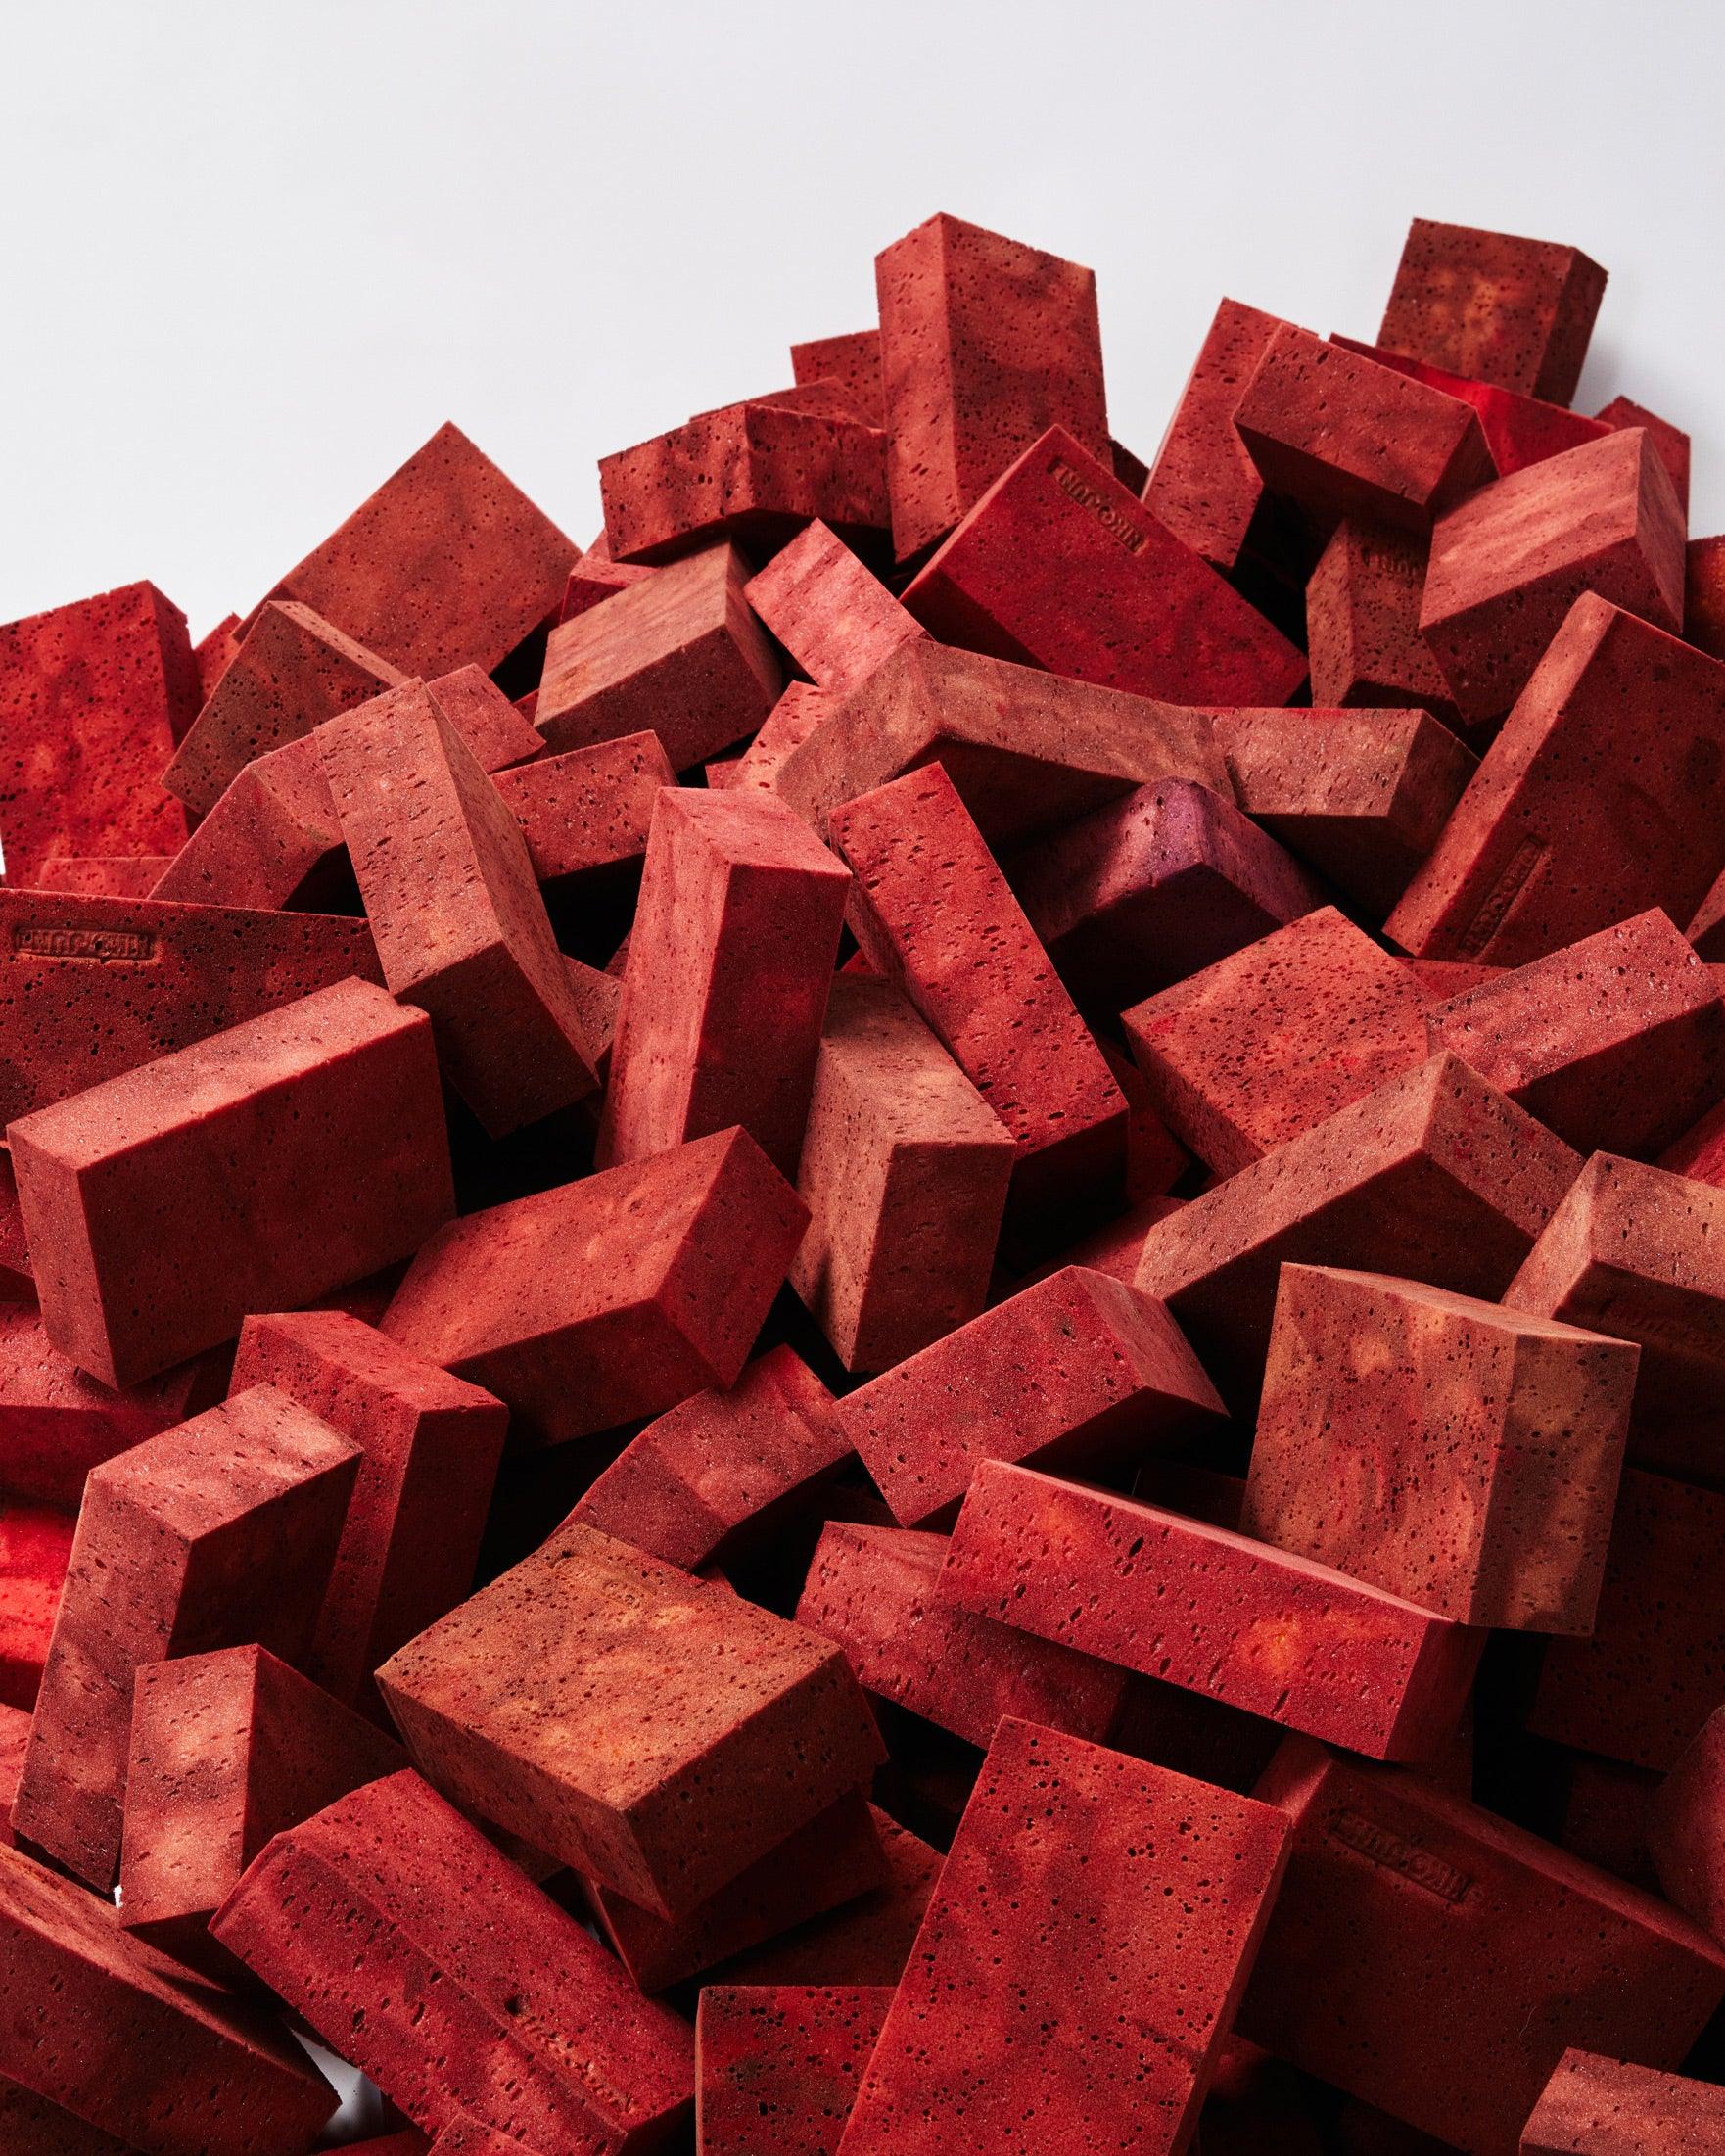 Messy structure of red bricks with white background